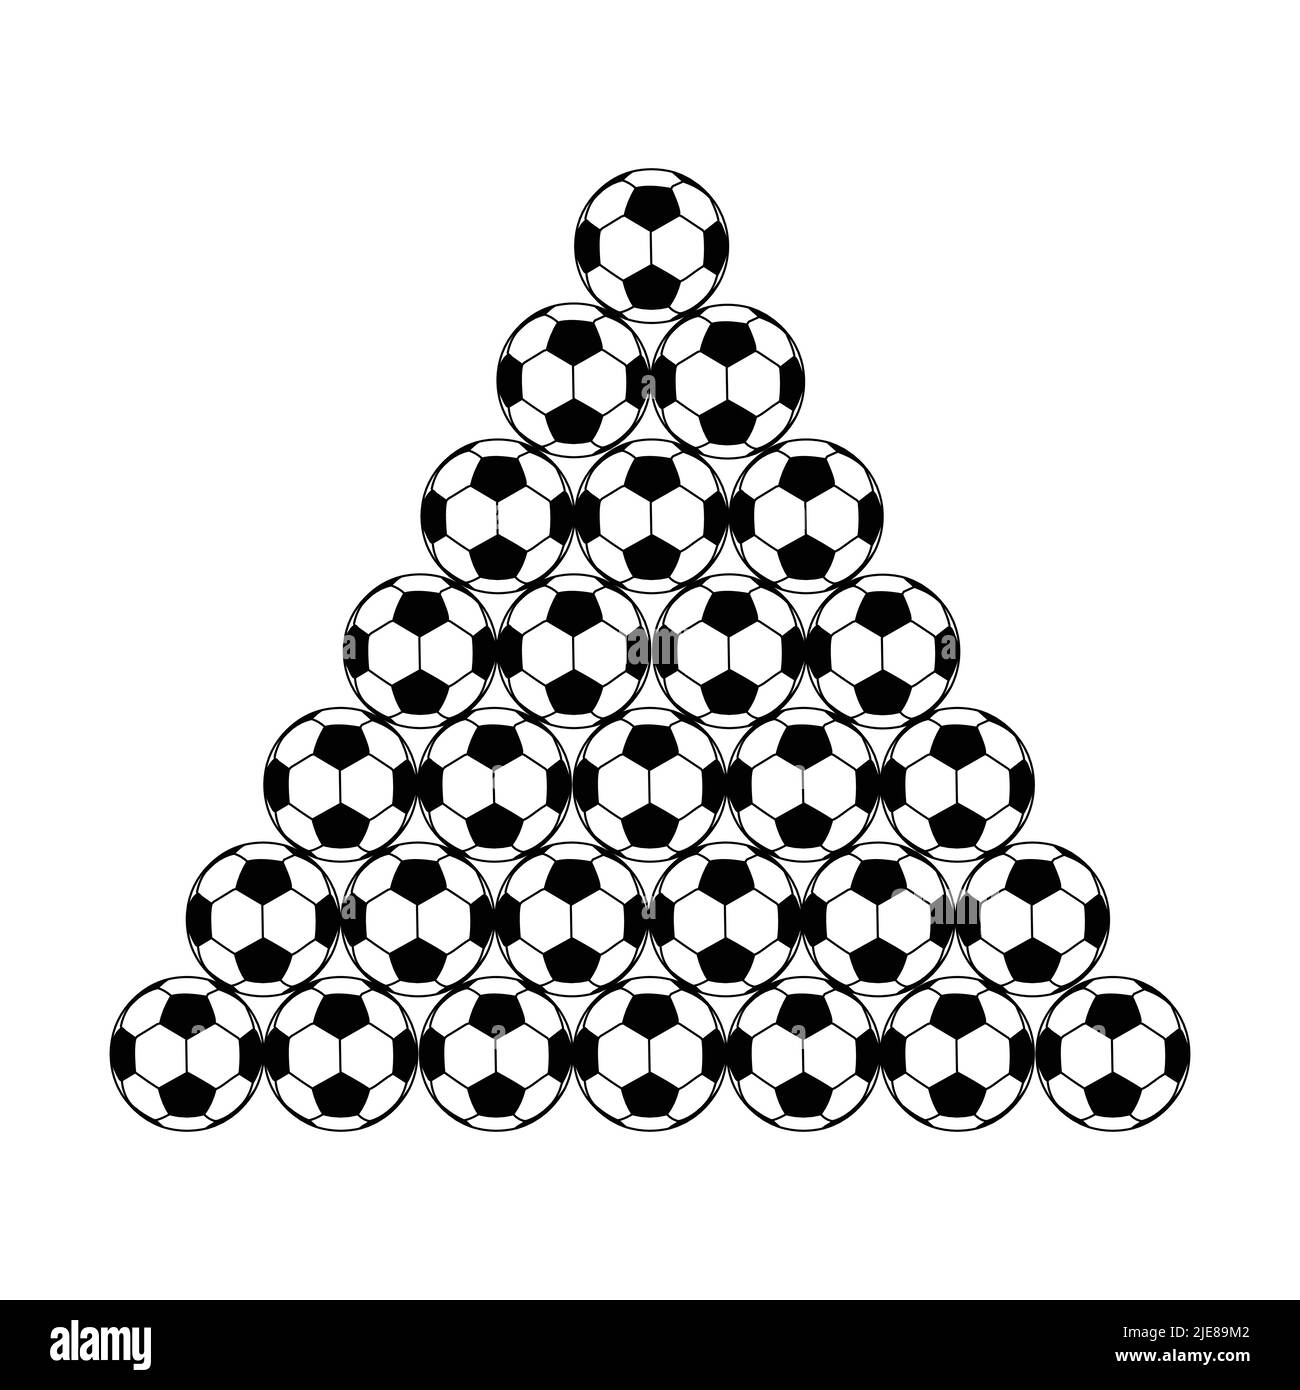 Football is stacked in a pyramid type arranged. vector Stock Vector